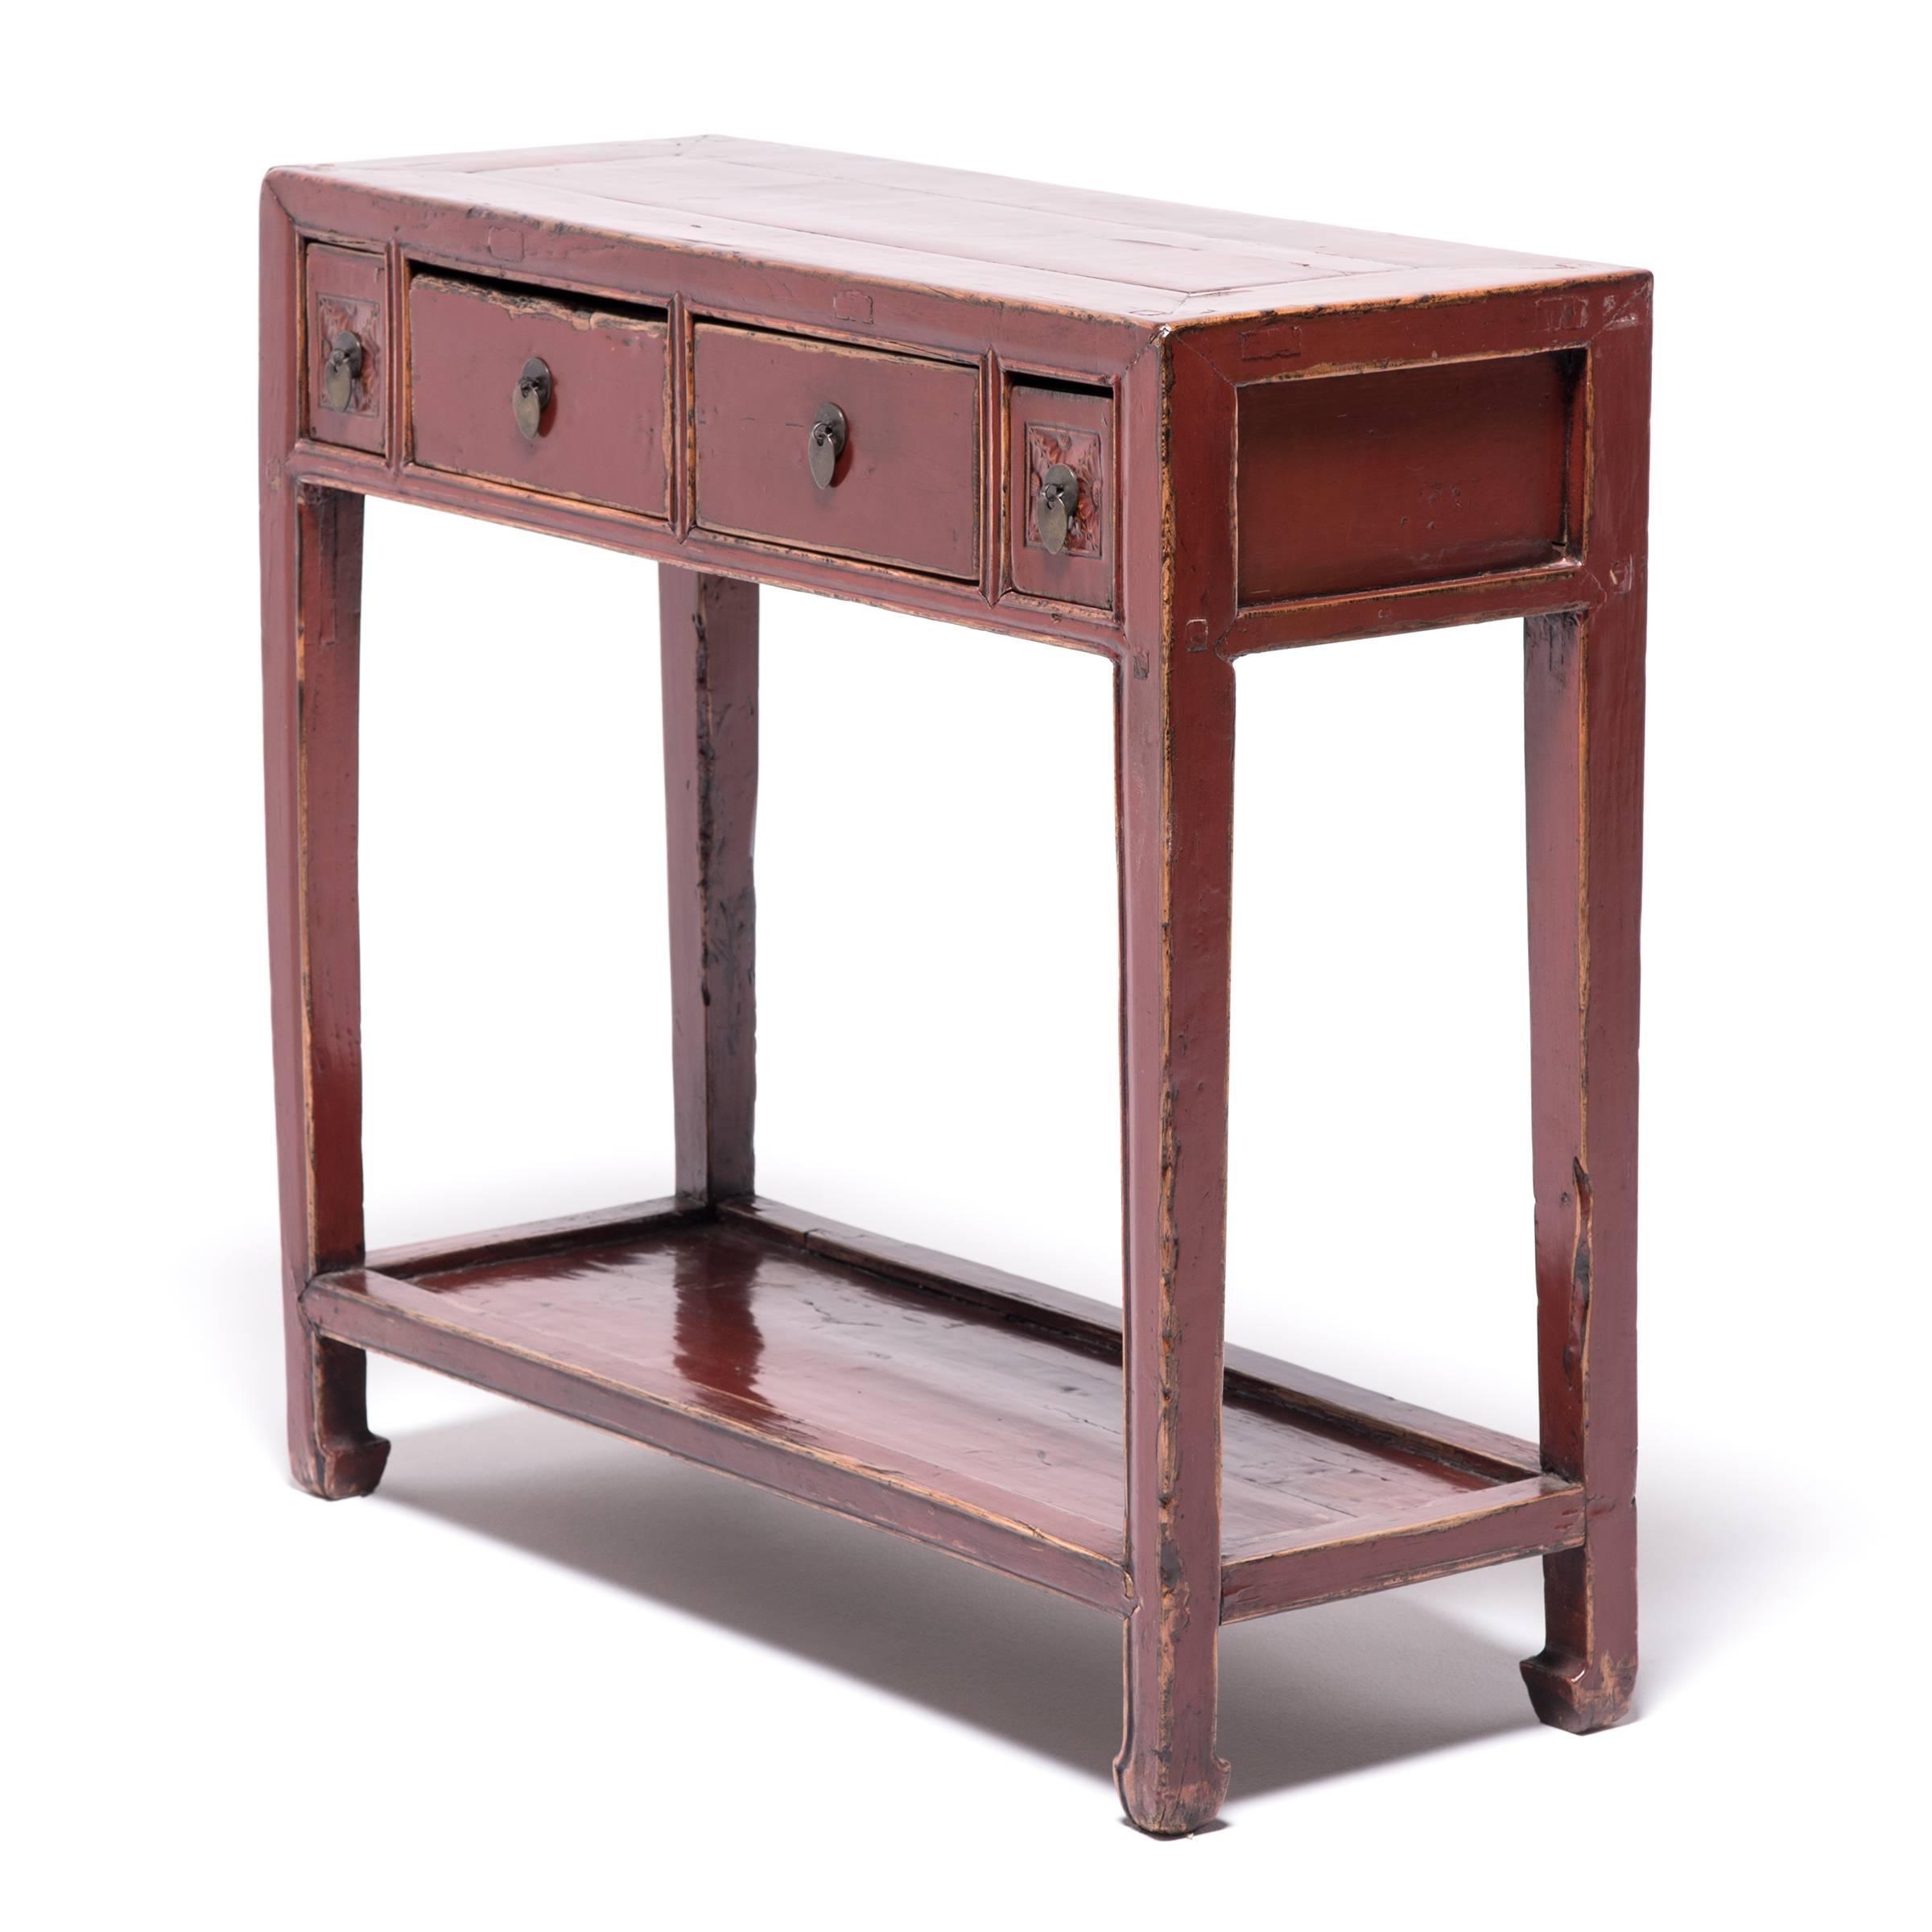 Brushed with many coats of red lacquer, this petite table once bore ritual objects as an altar table. Made around 1900 of Chinese northern elmwood, the table has a simple square shape, ever so slightly decorated with the subtle hoof-shaped feet,